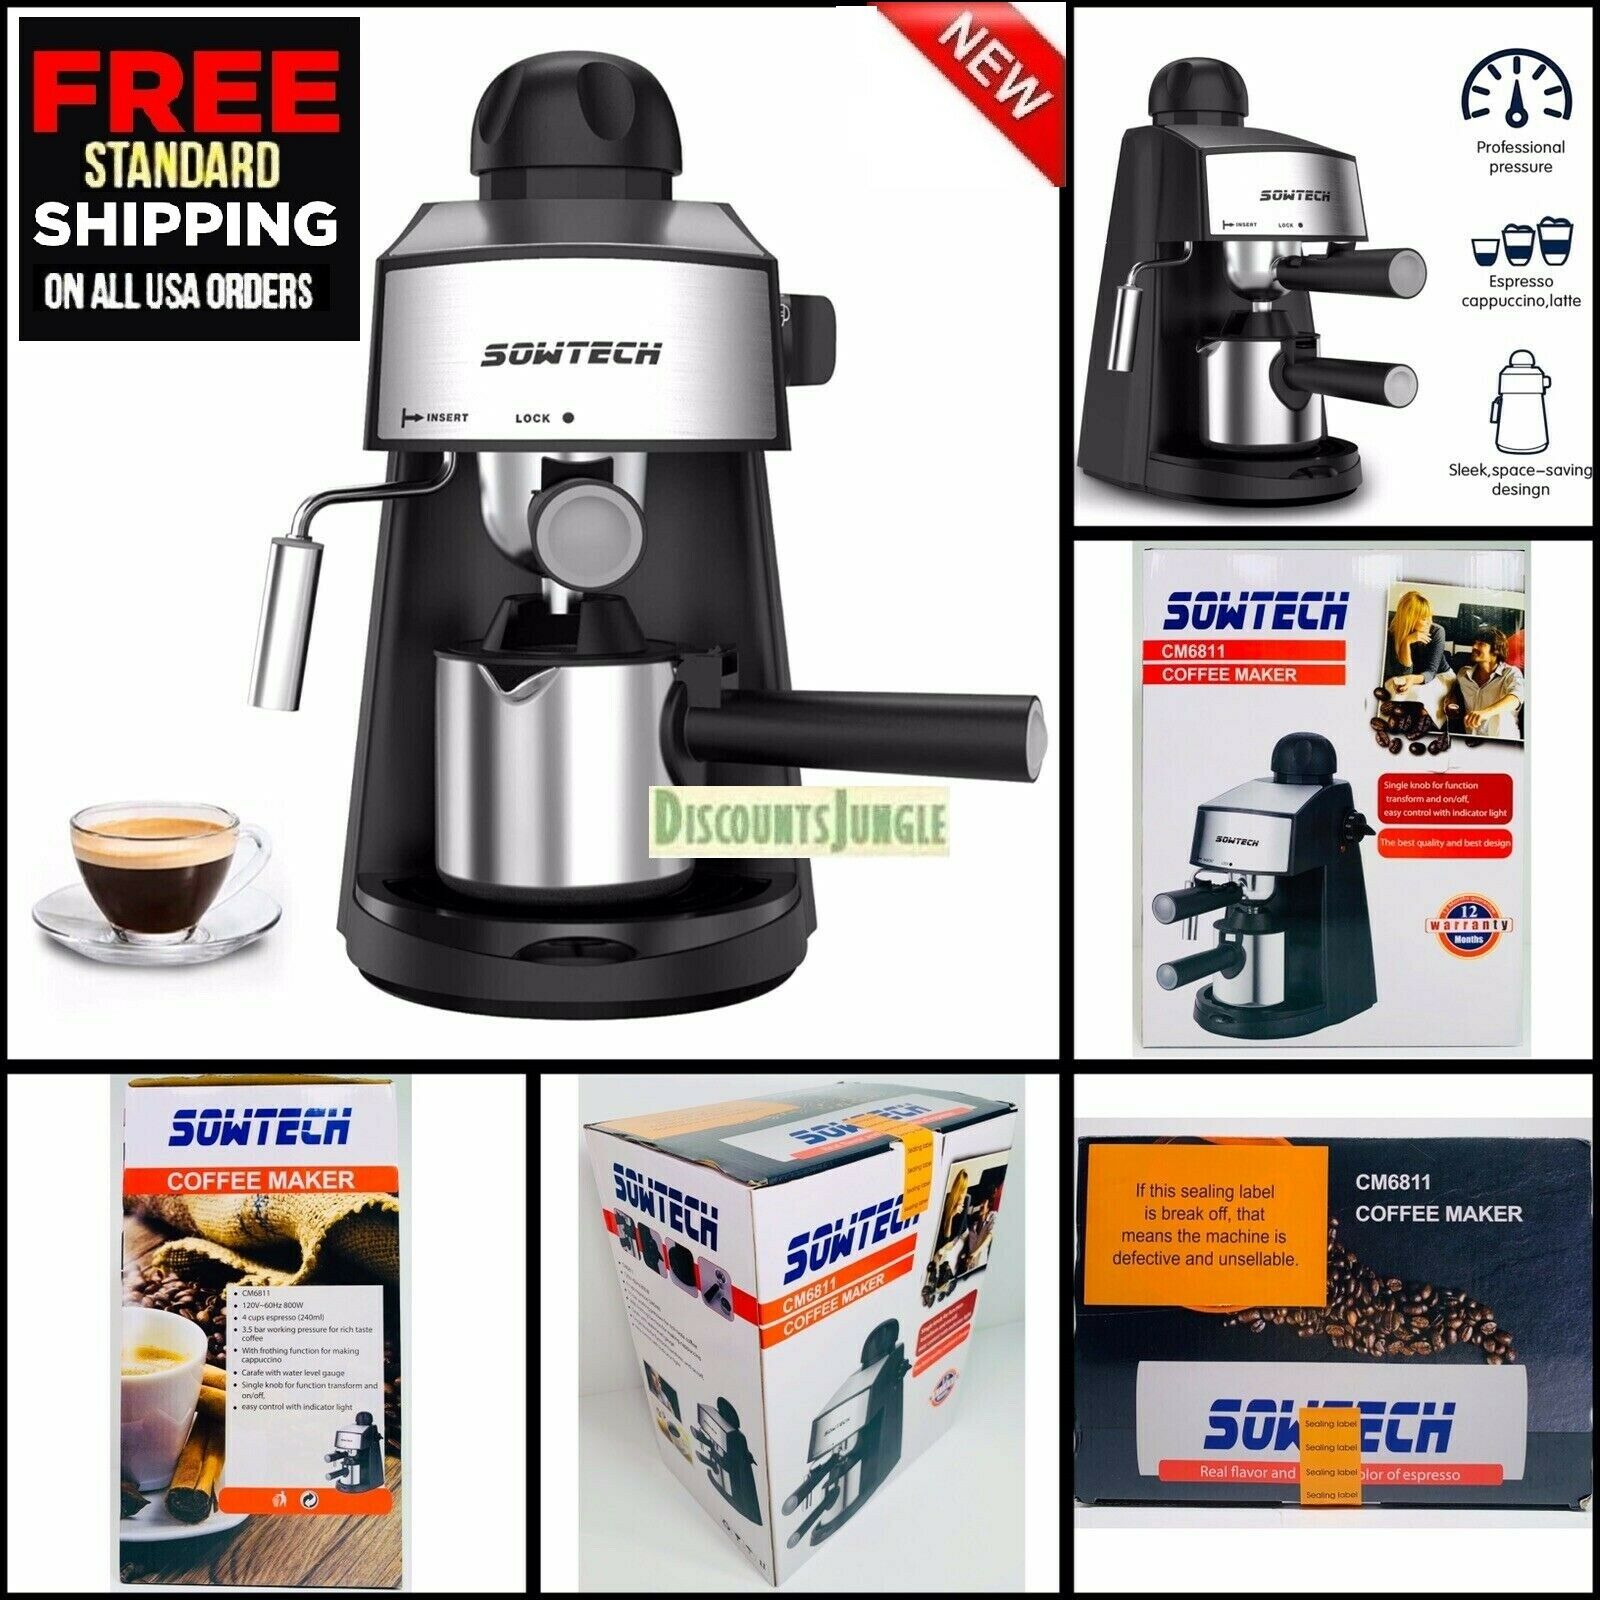 Sowtech Cm6811 Coffee Espresso Maker 3.5 Bar 4 Cup Cappuccino With Milk Frother